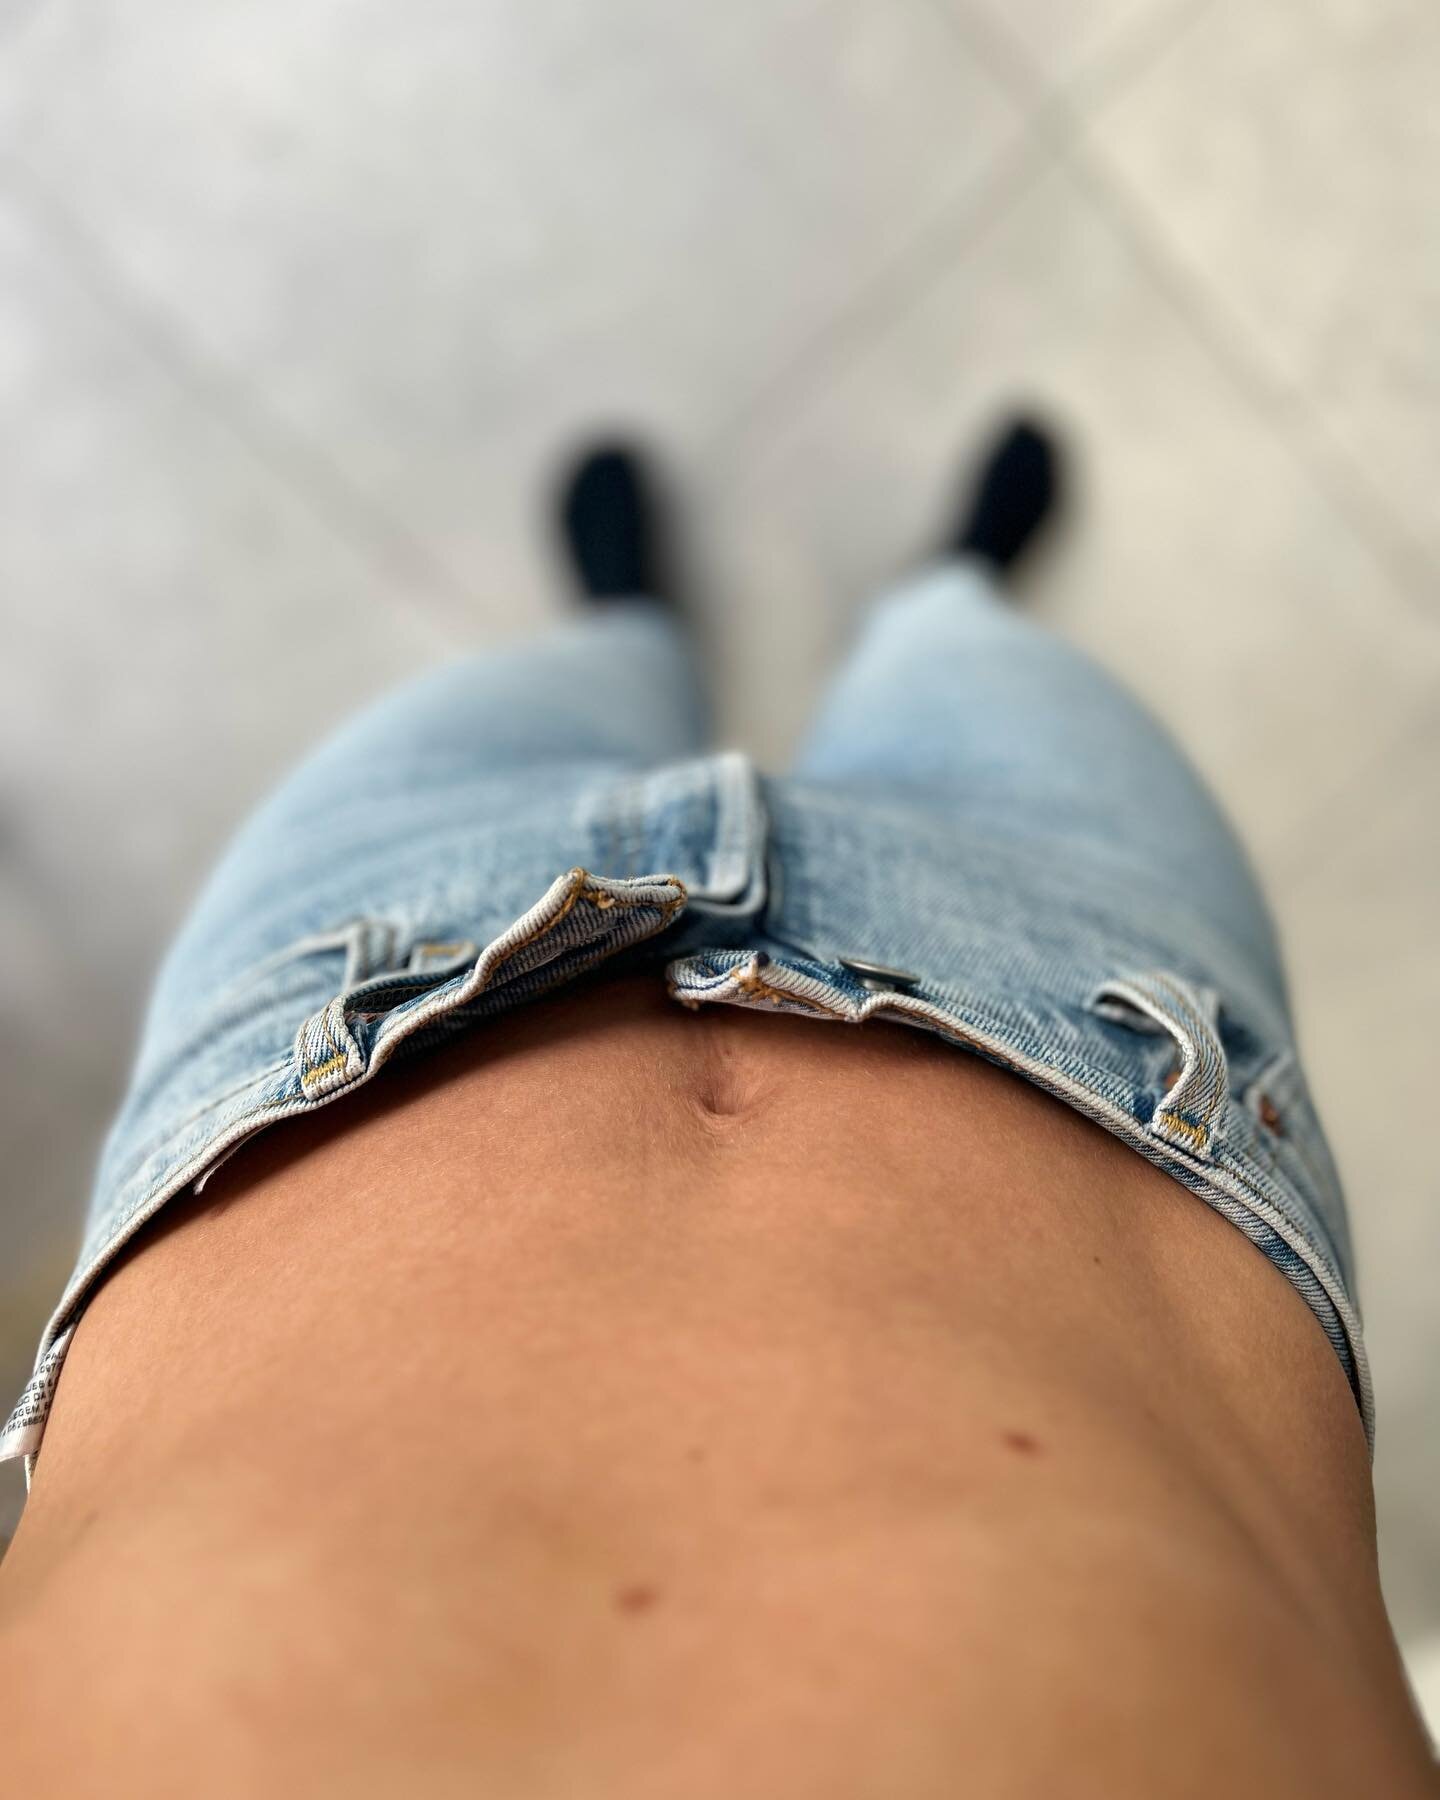 With many of us back to real life today having spent the festive season (hopefully) enjoying all the wonderful indulgences that come our way, it is pretty much inevitable that our jeans might feel a little tighter than they did before.

This can be h